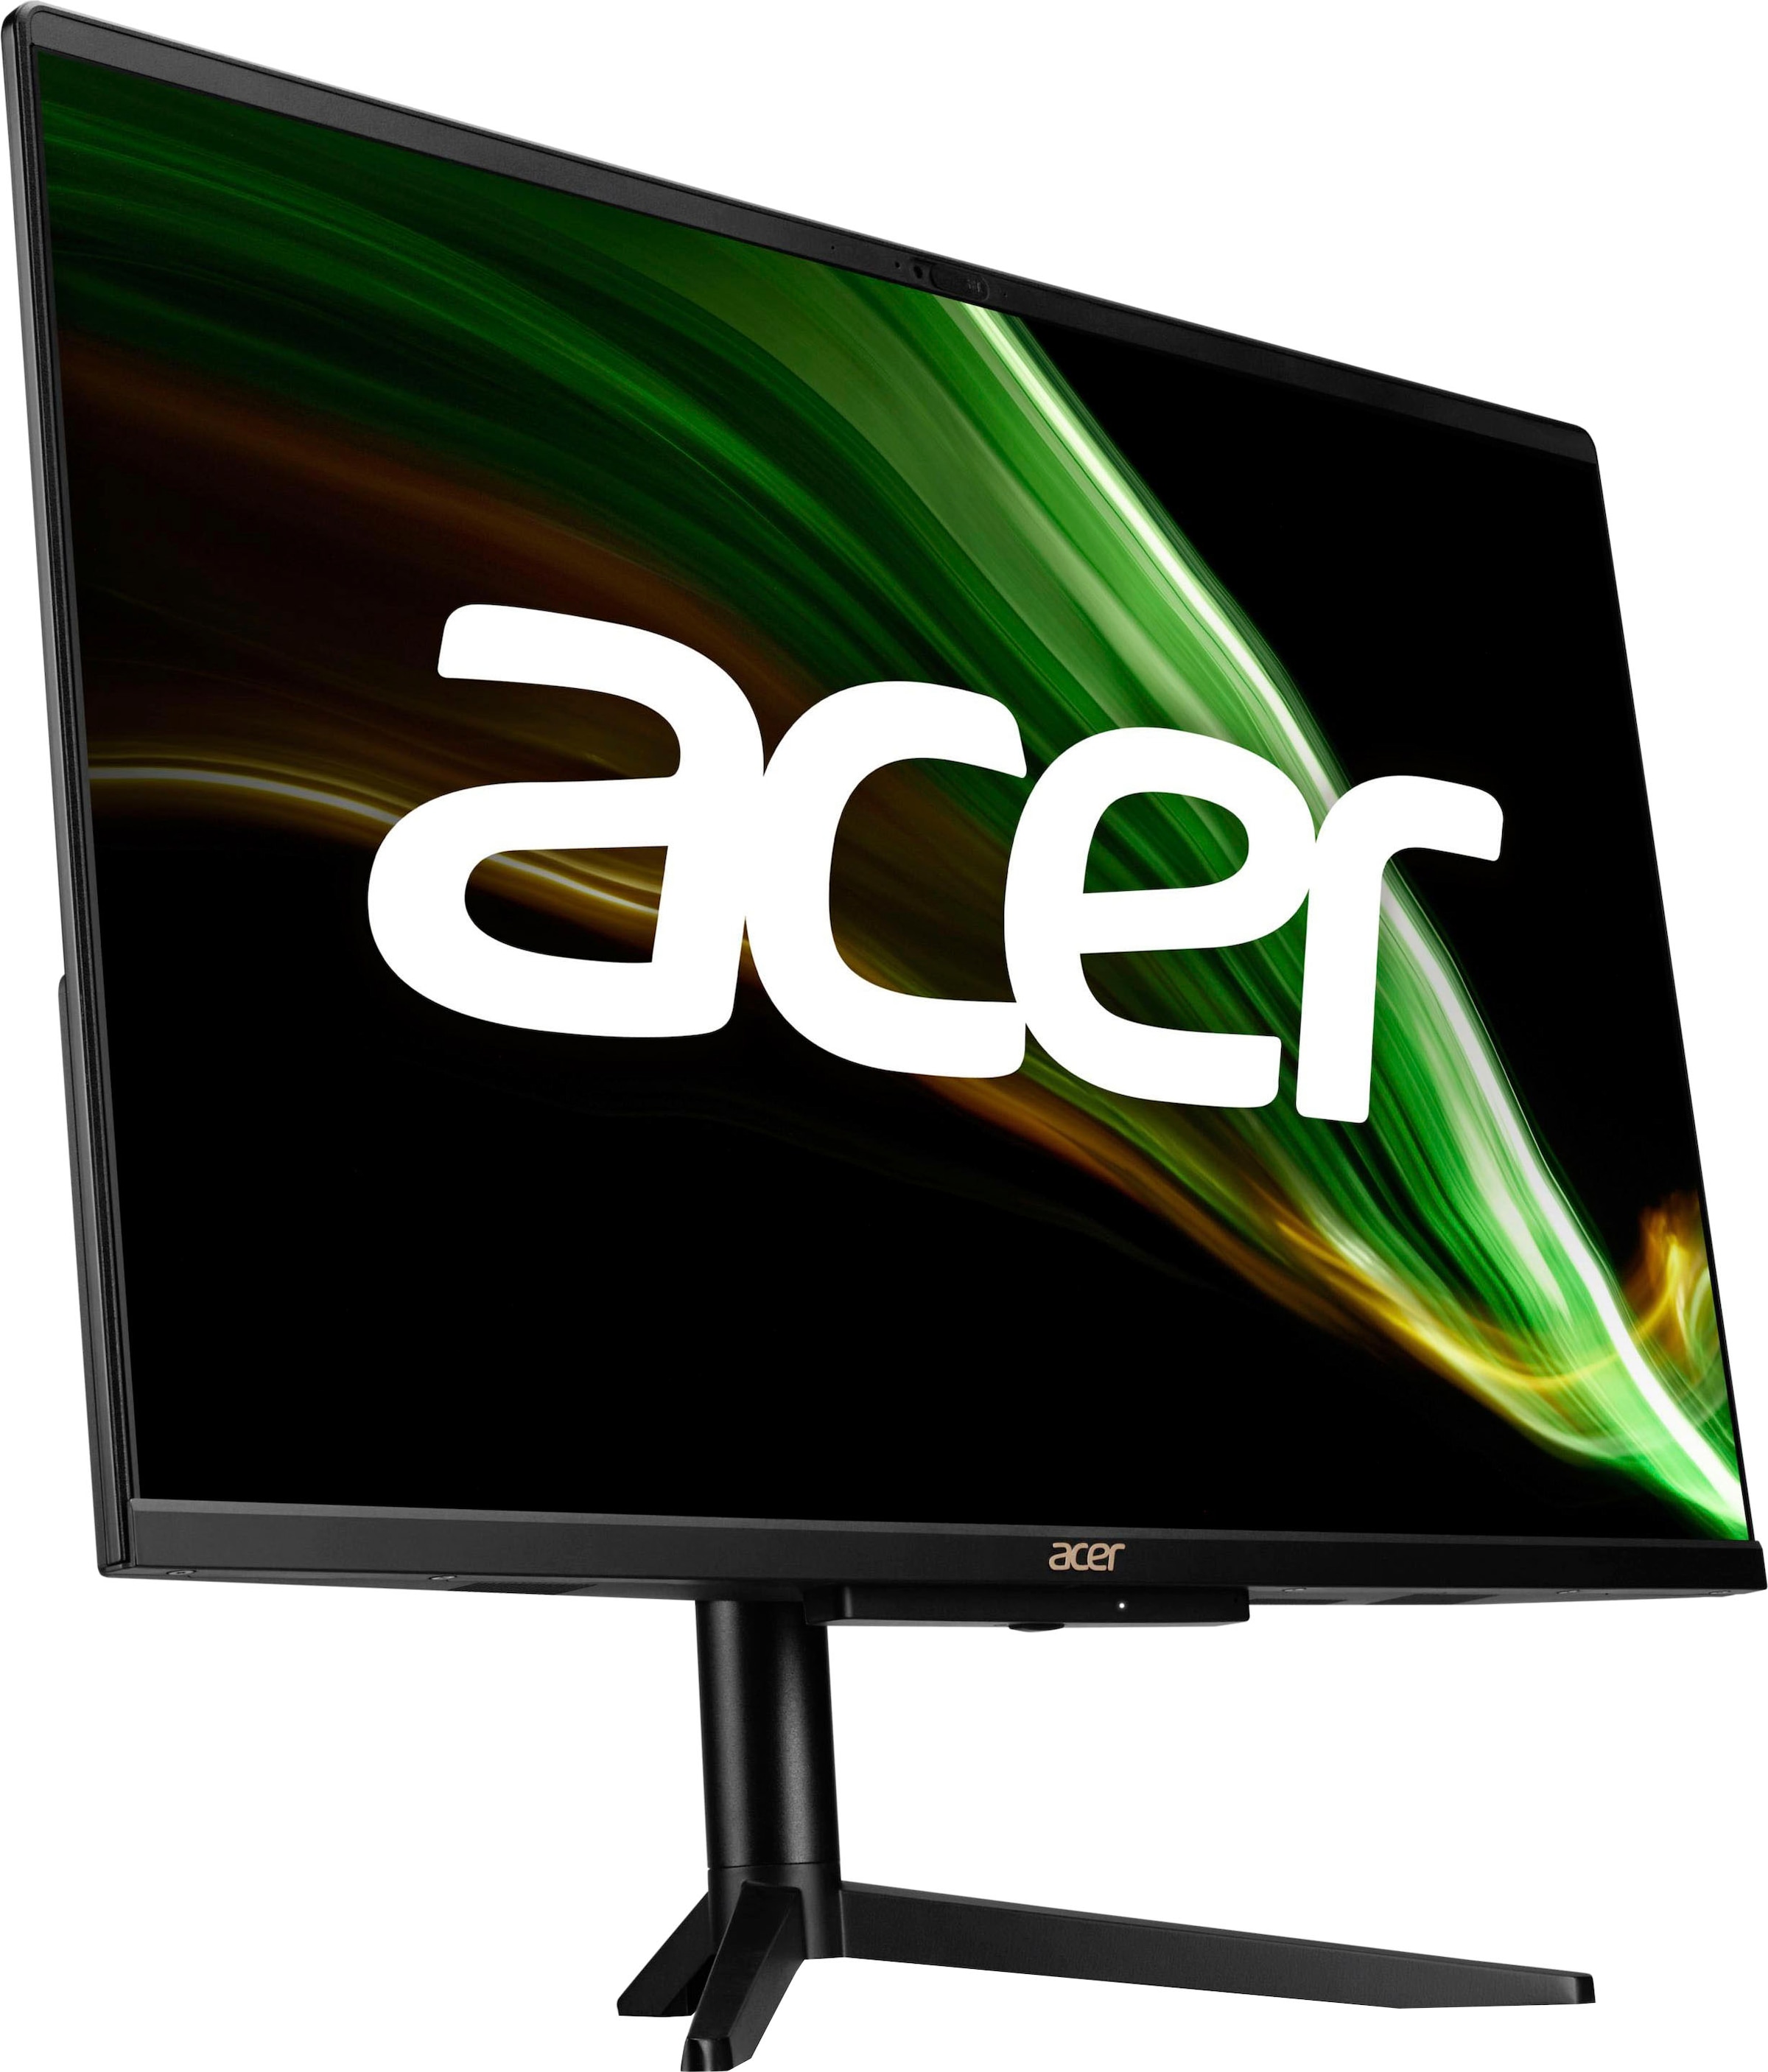 | PC BAUR »Aspire C24-1600« Acer All-in-One